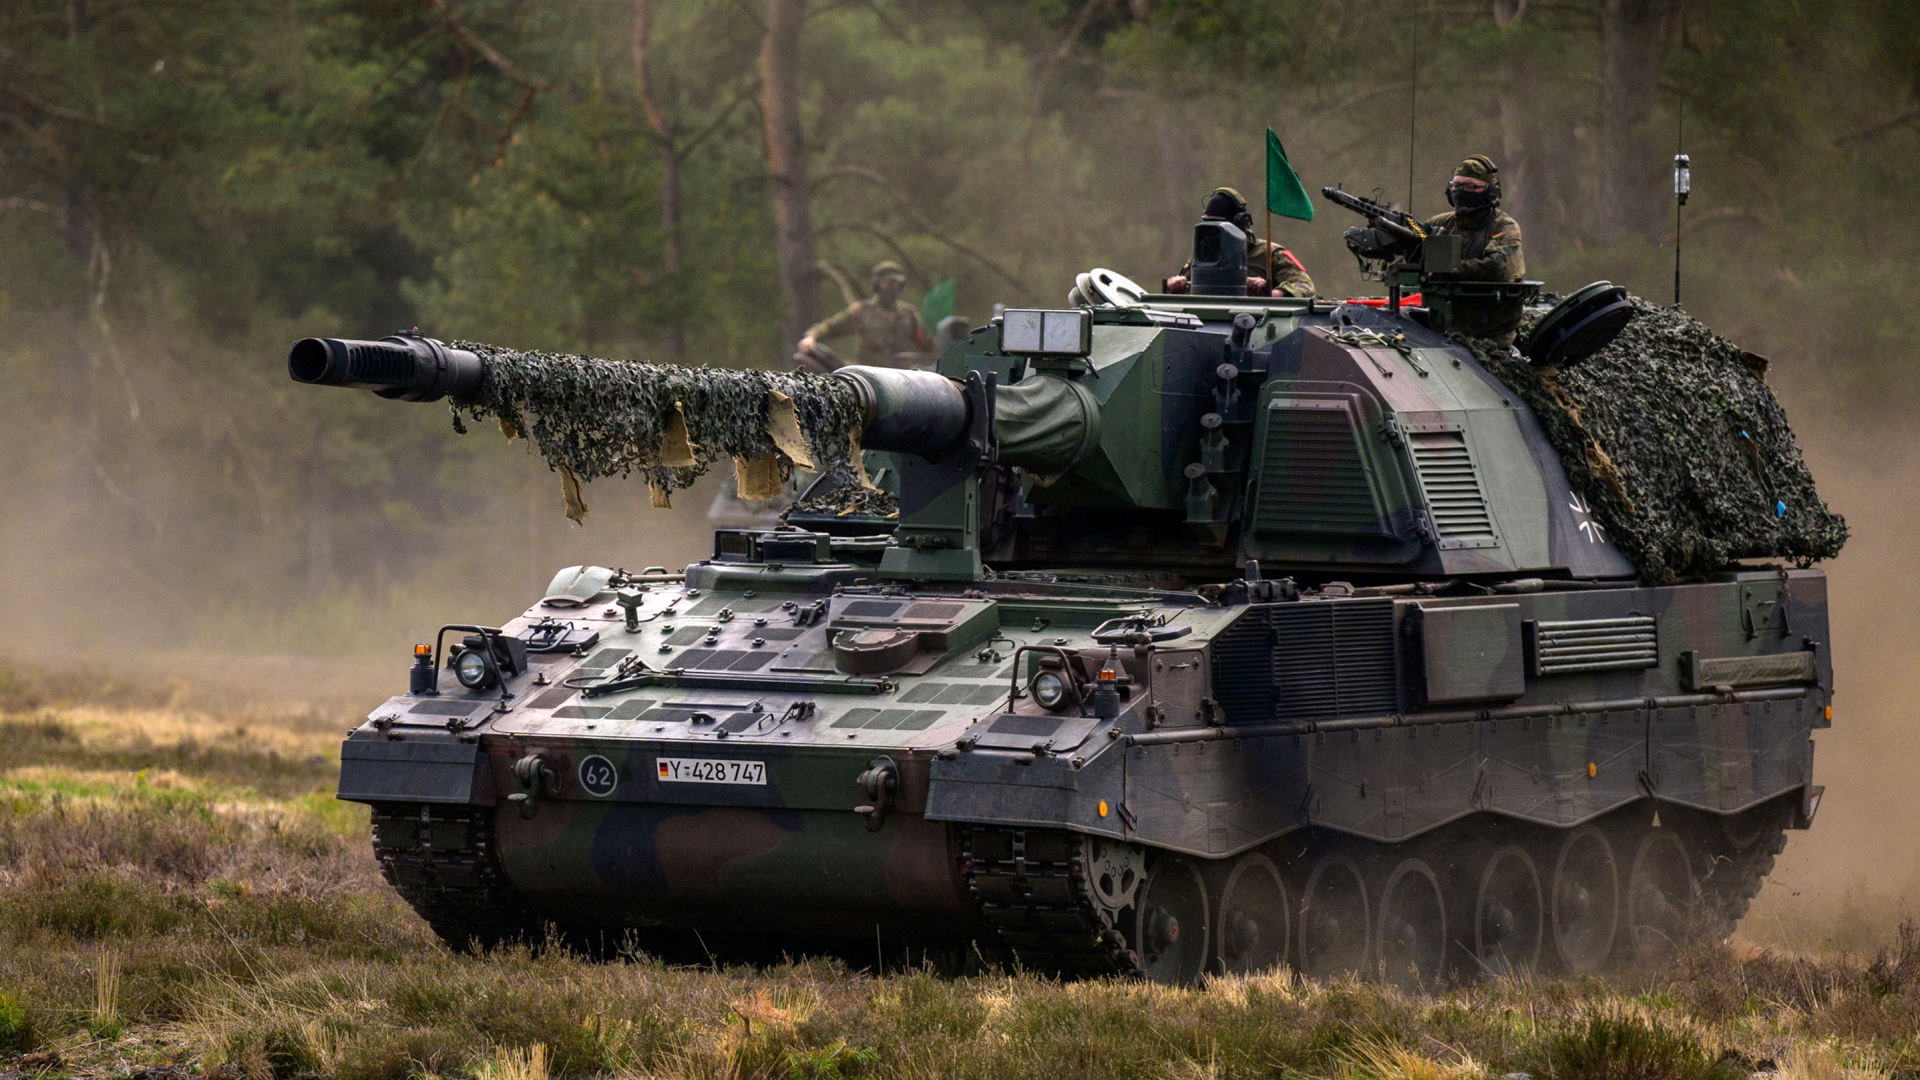 Report from the SIPRI Institute: Europe is arming itself